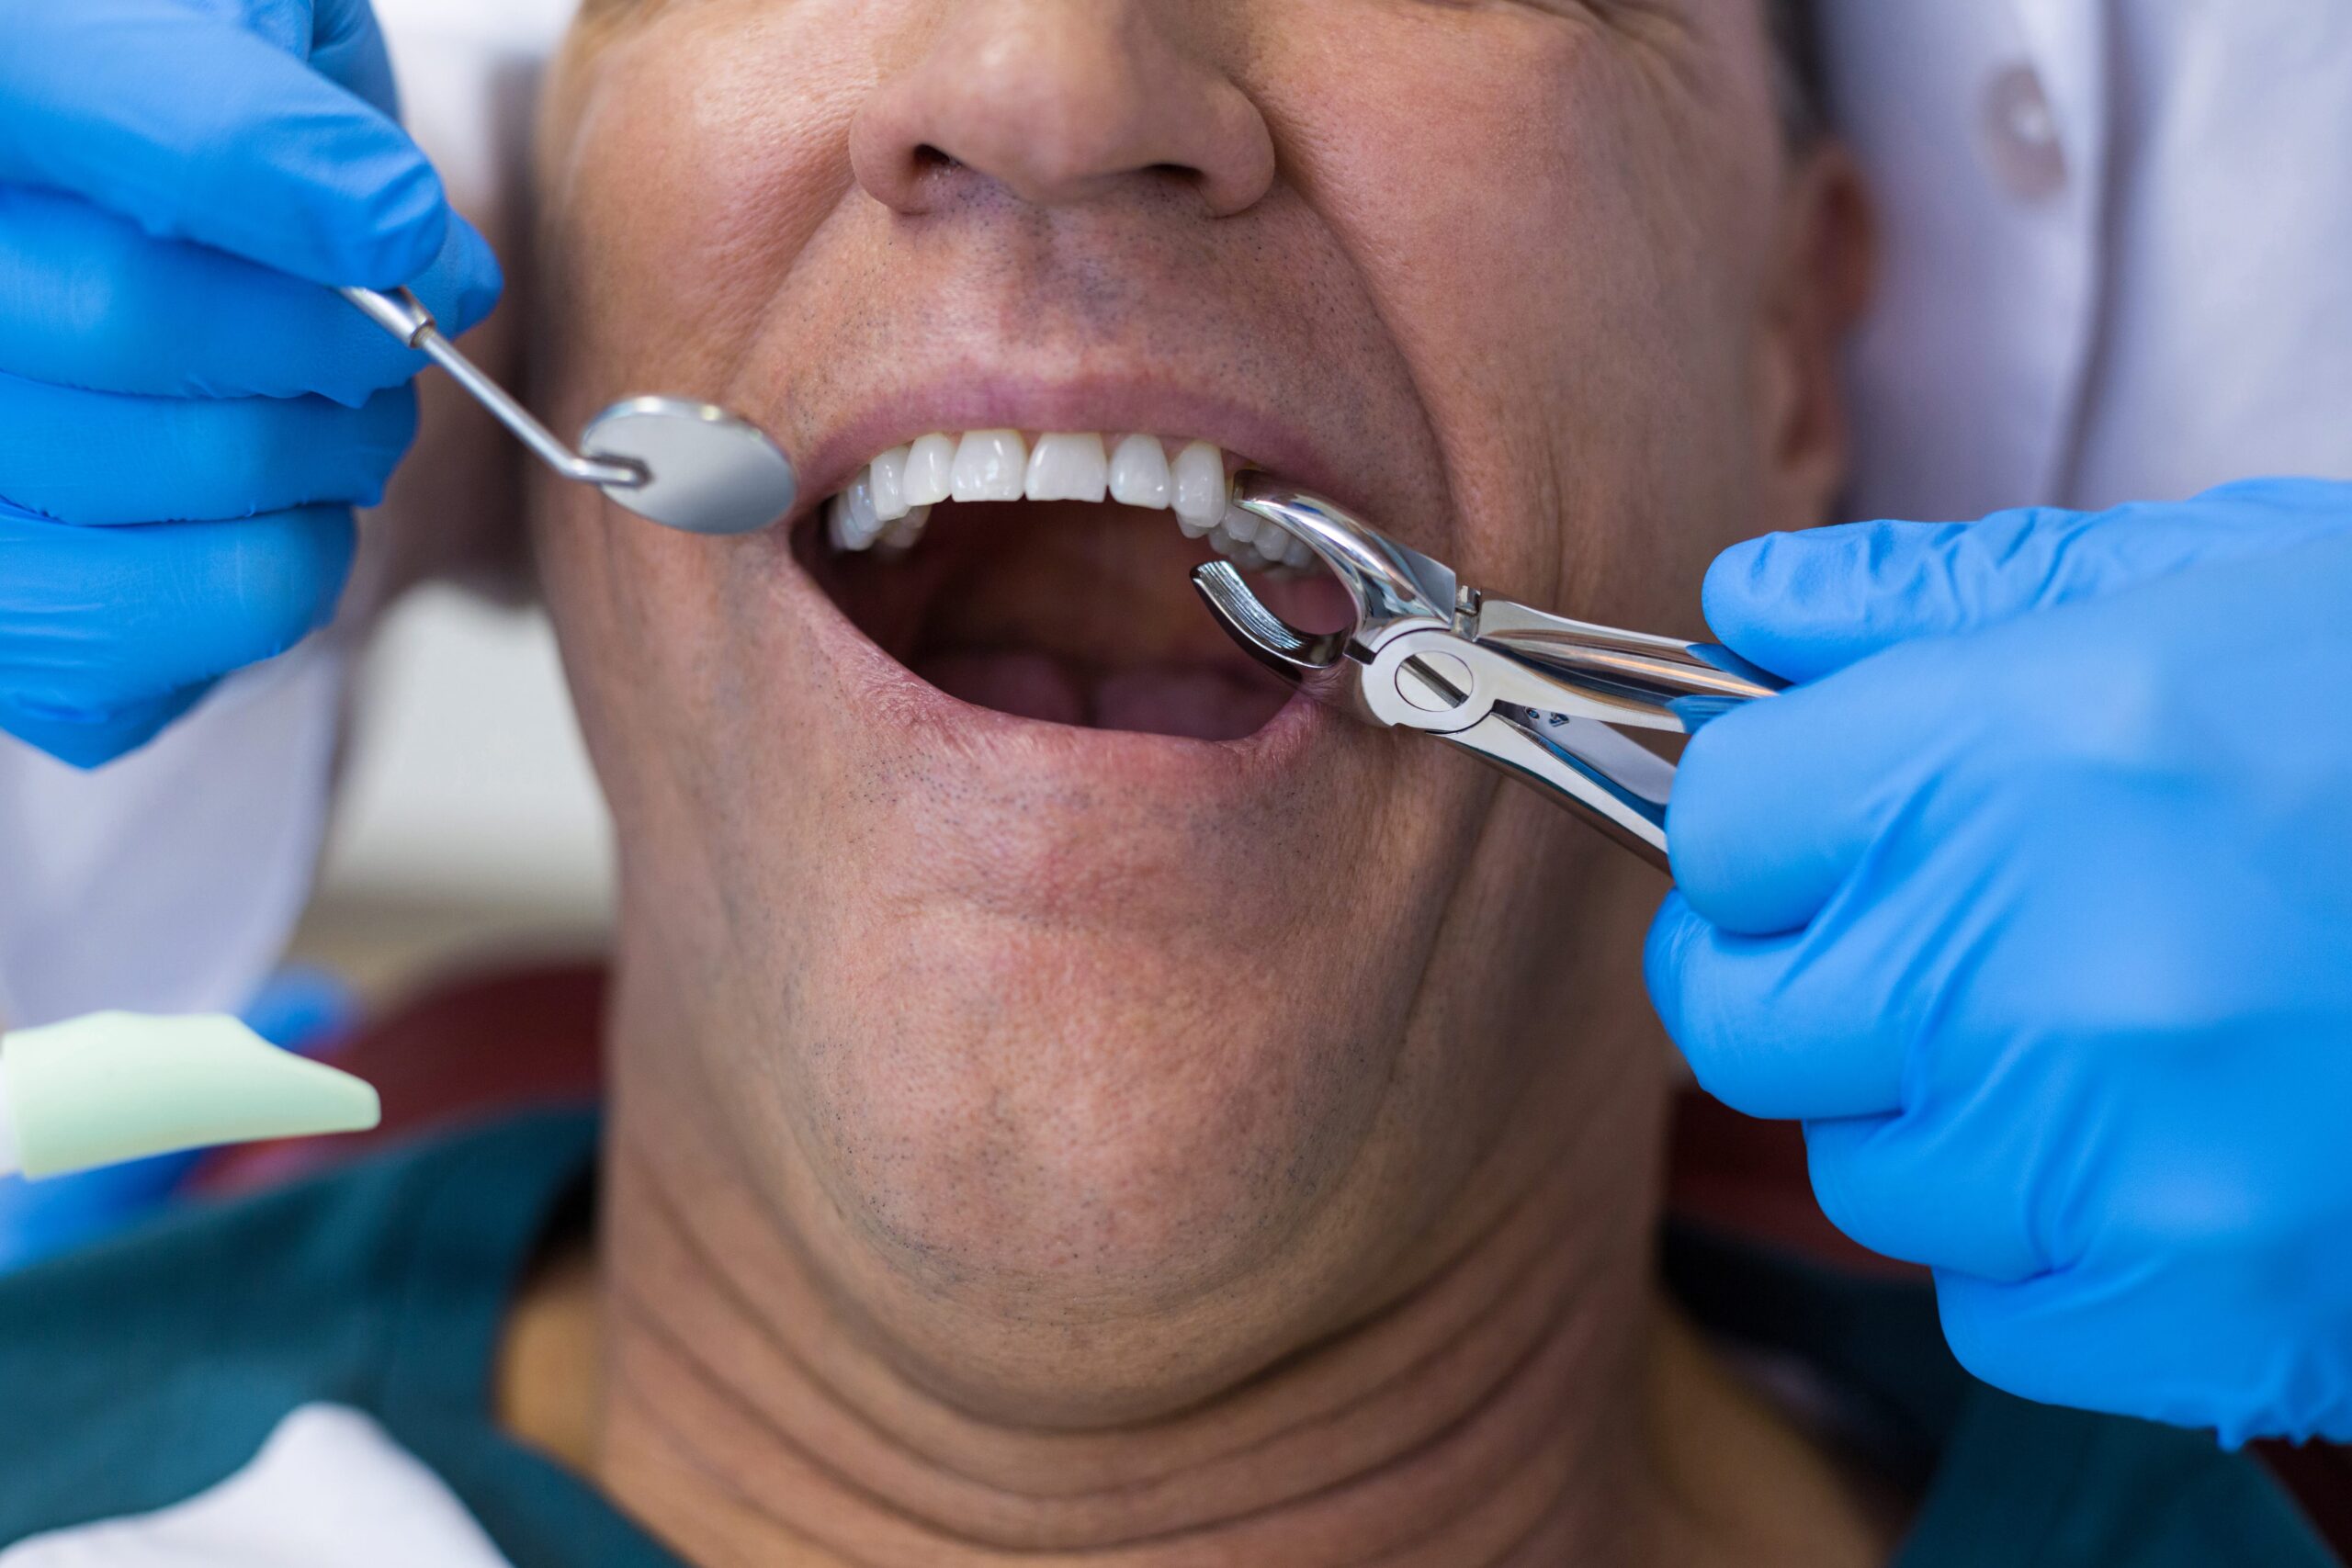 What To Look For When Choosing An Implant Dentist